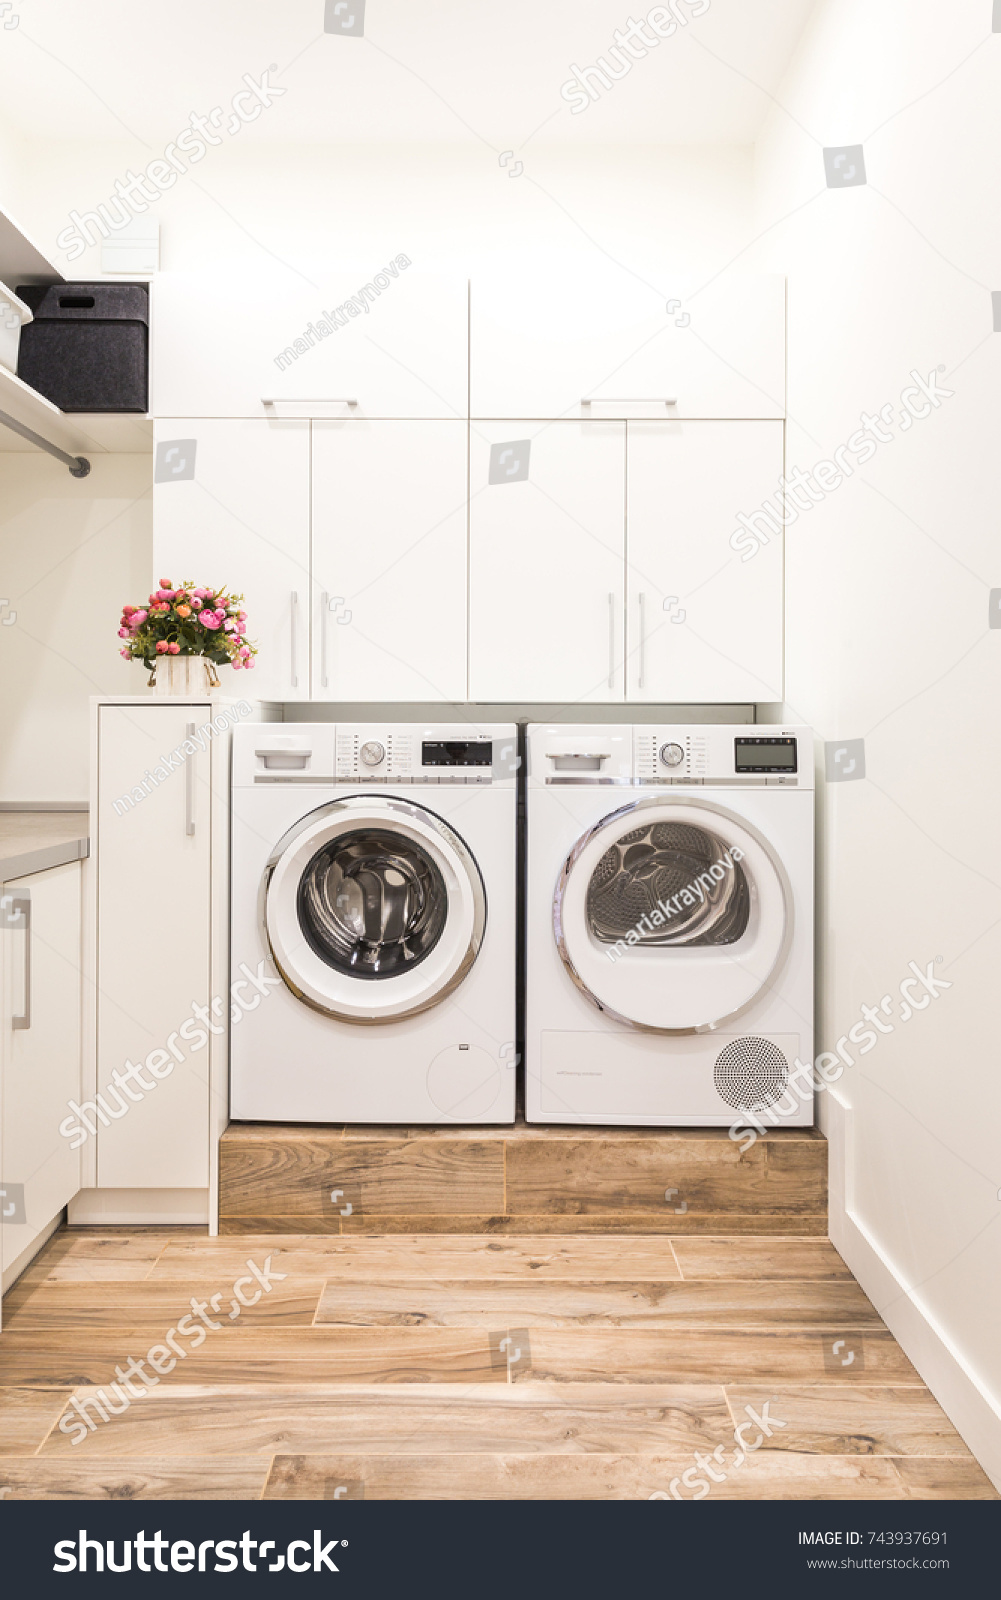 Laundry room with washing and drying machines #743937691